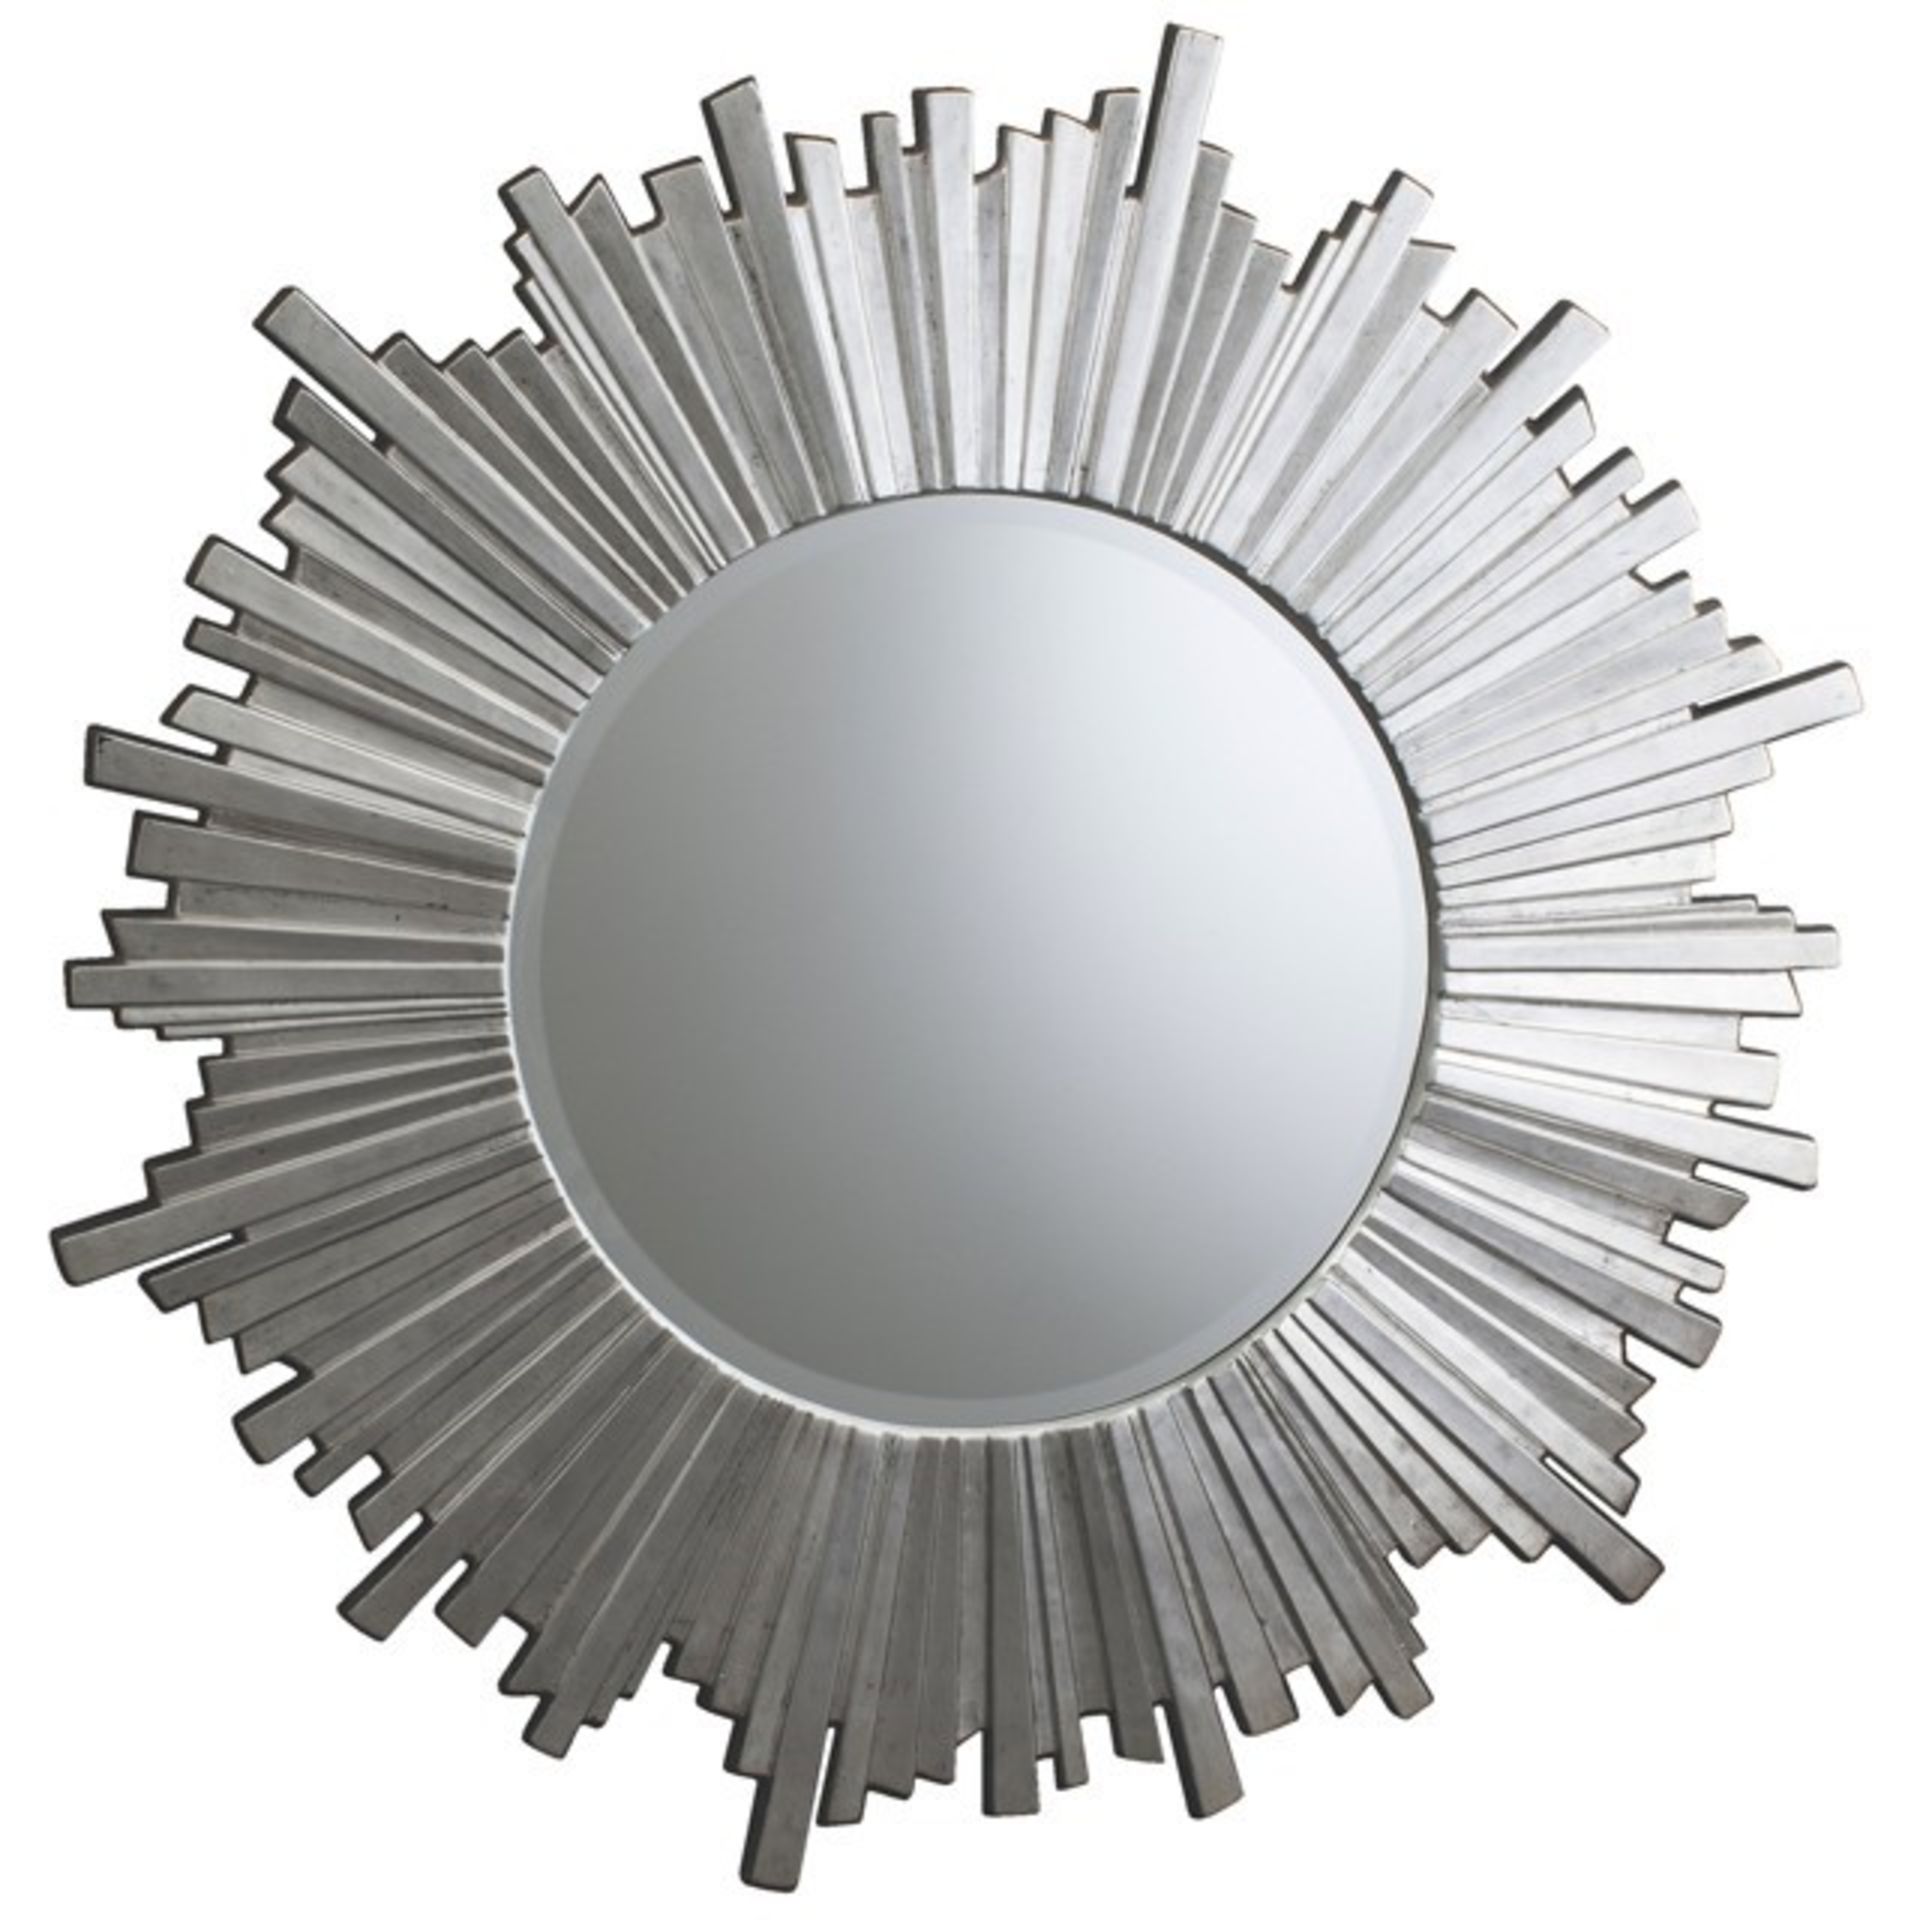 1 GRADE A HERZFELD ROUND WALL MIRROR / RRP £178.00 (VIEWING HIGHLY RECOMMENDED)